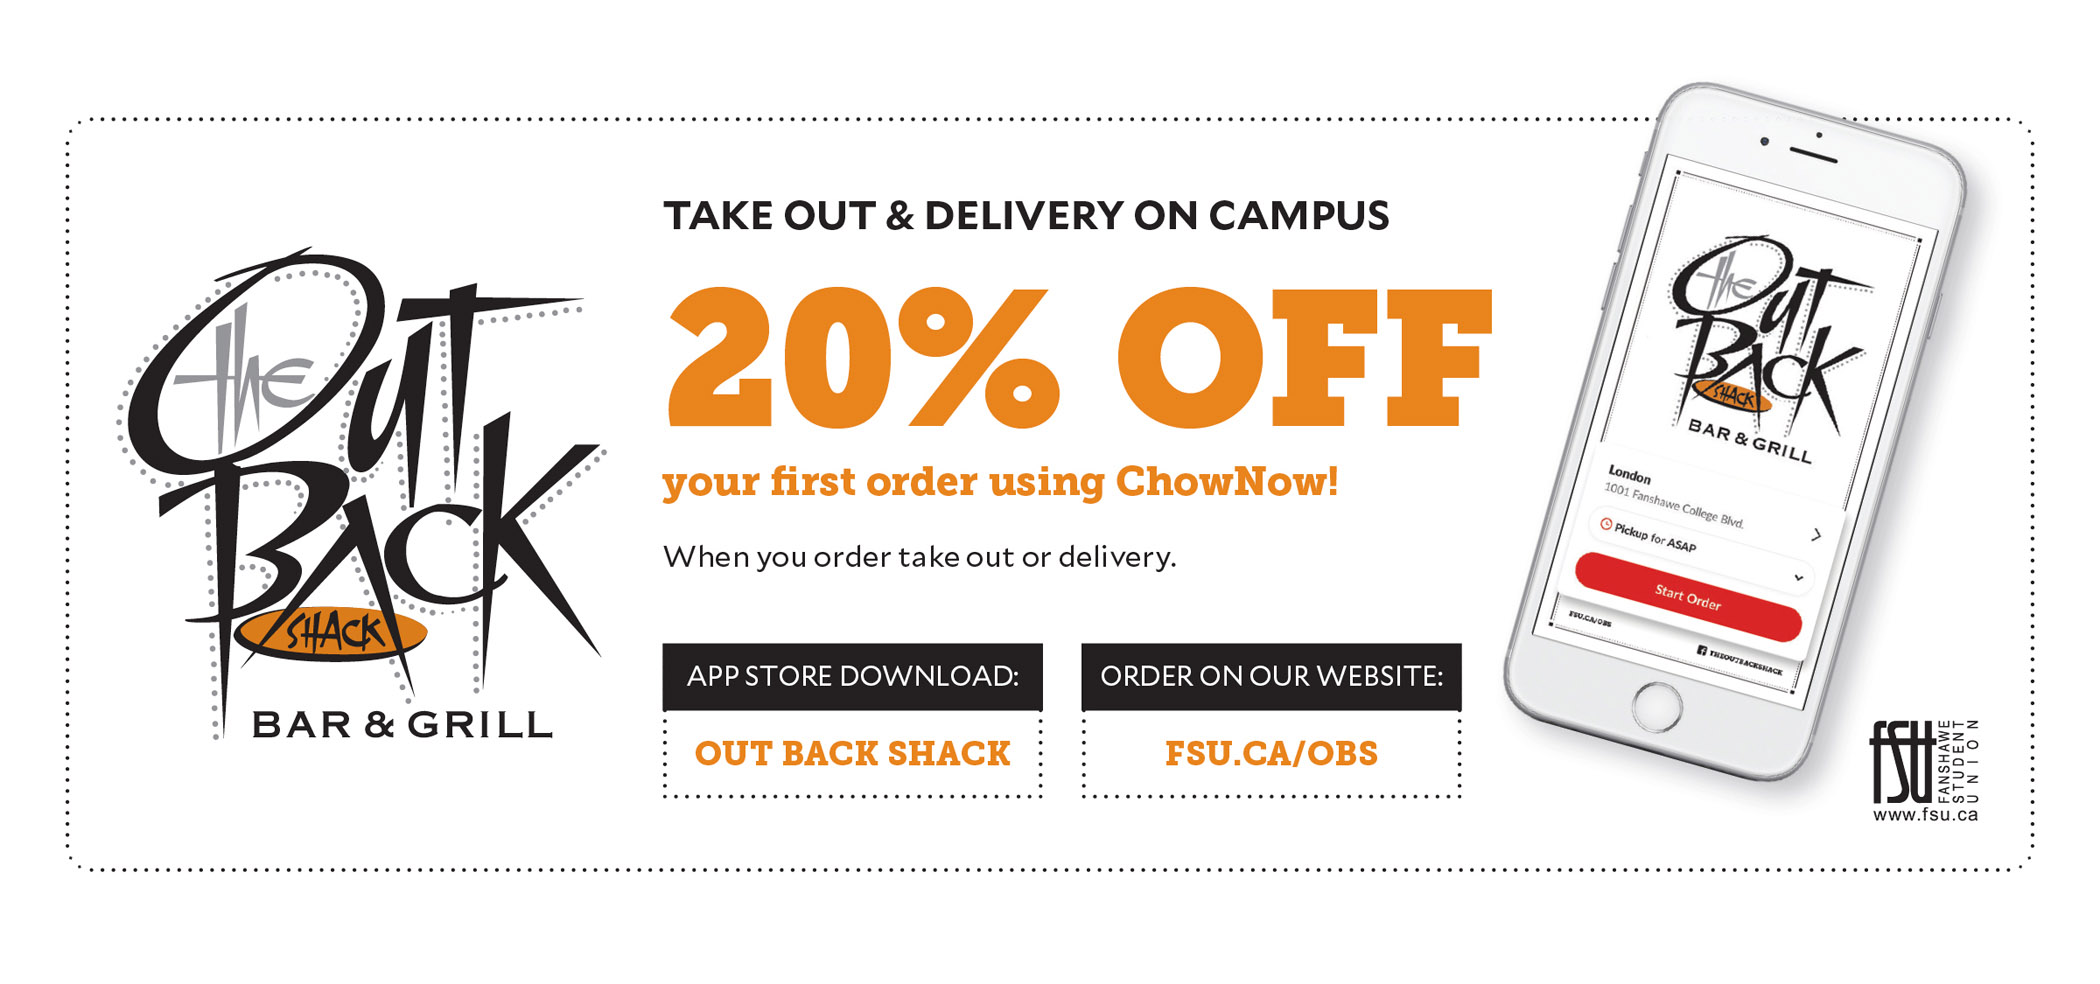 20% off your first order using ChowNow